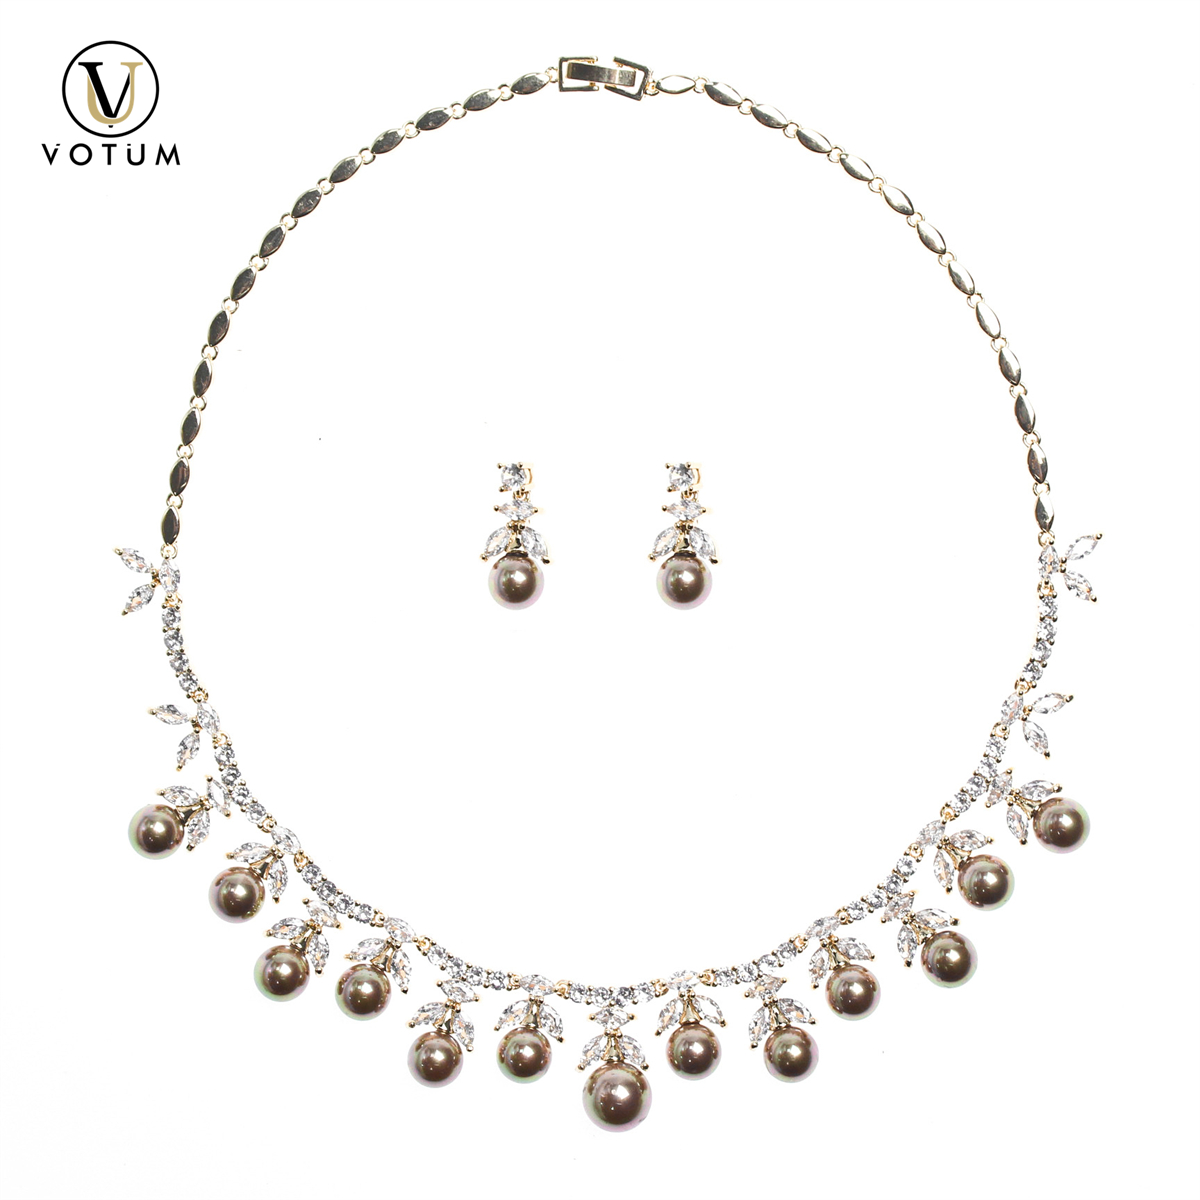 Votum OEM Fashion Gold Plated Freshwater Pearl Moissanite Diamond s925 Sterling Silver Necklace Earring Jewelry Set Luxury Jewellery